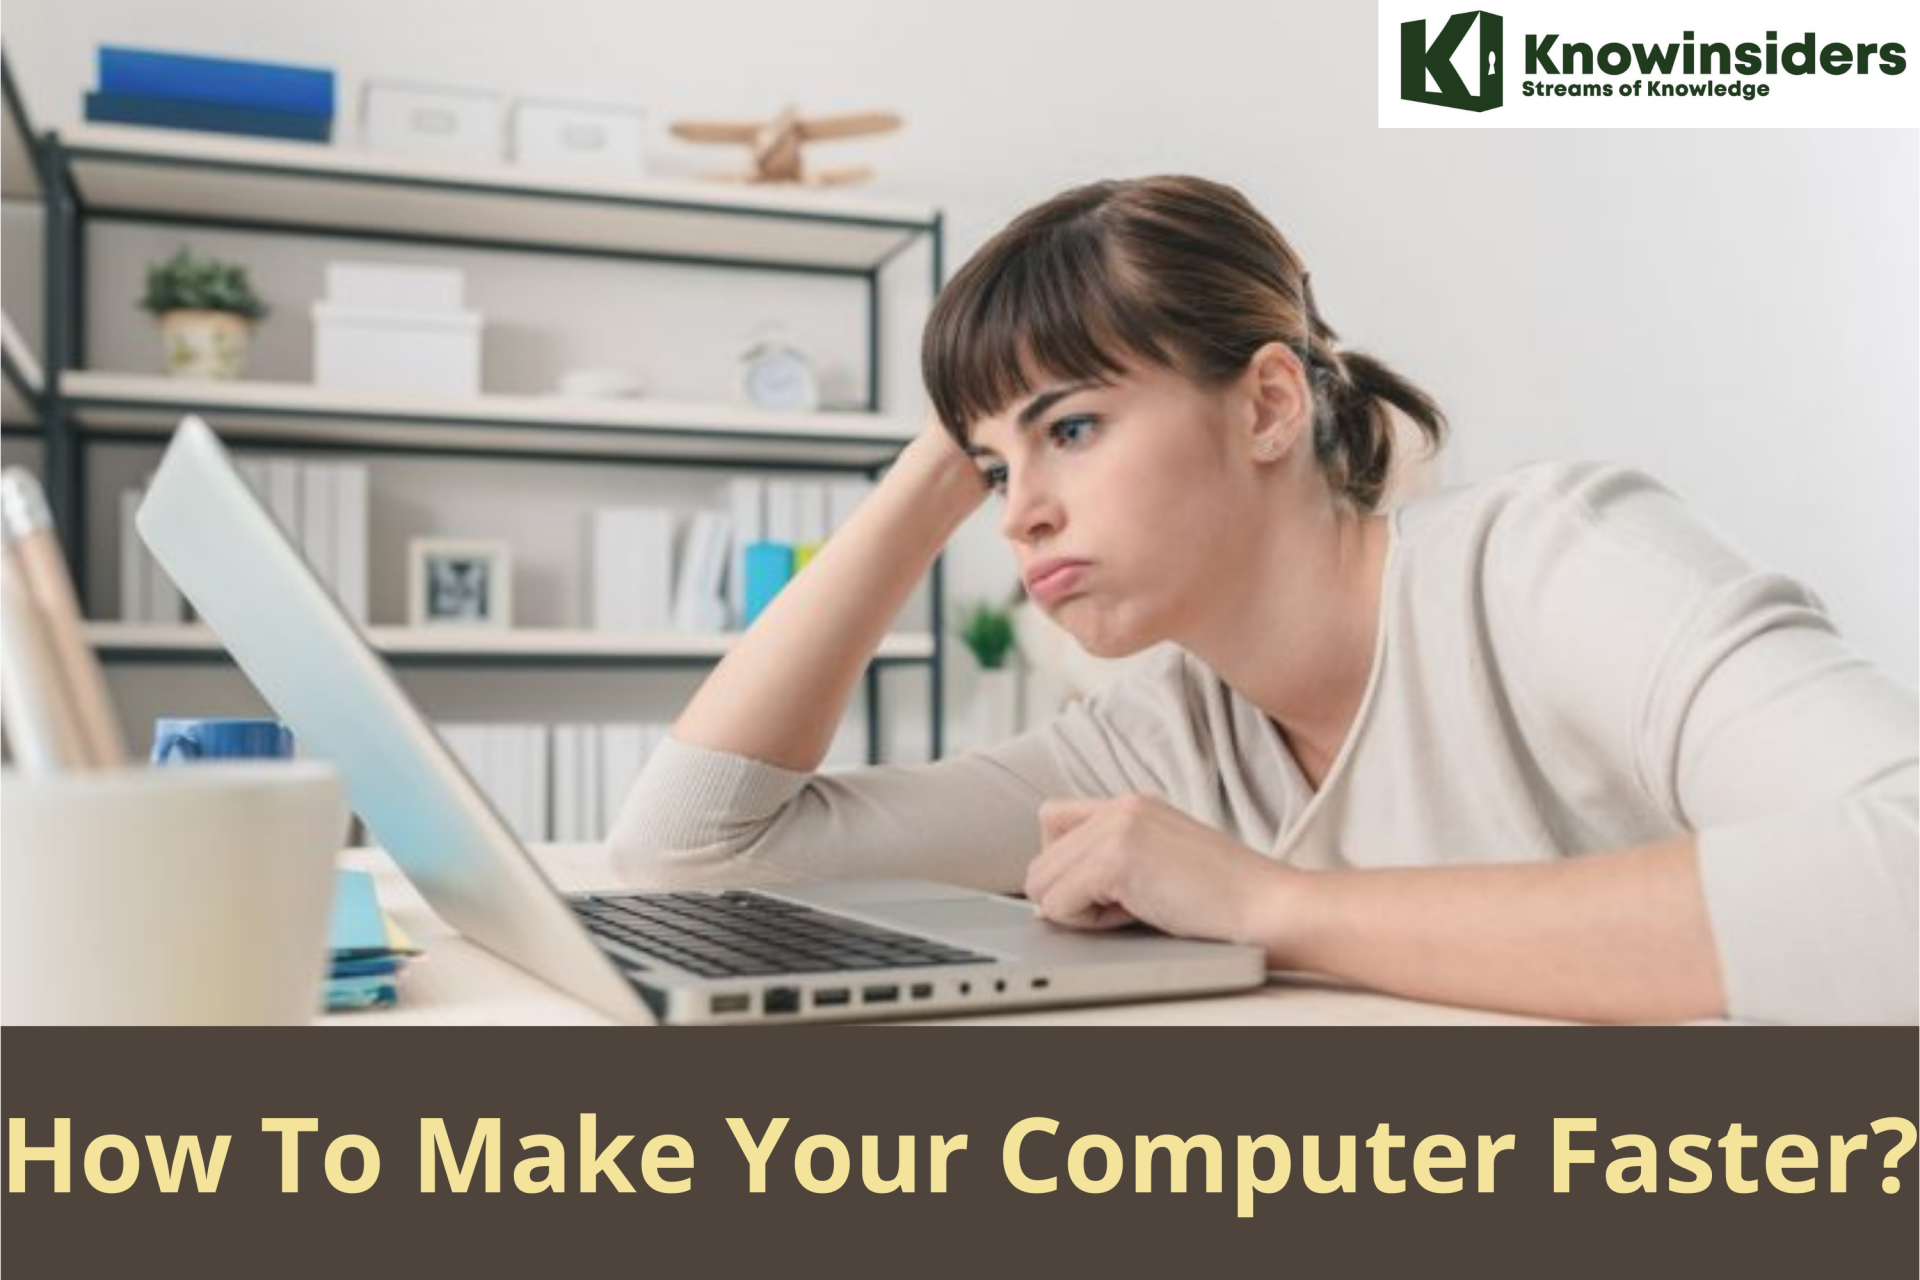 How To Make Your Computer Faster?